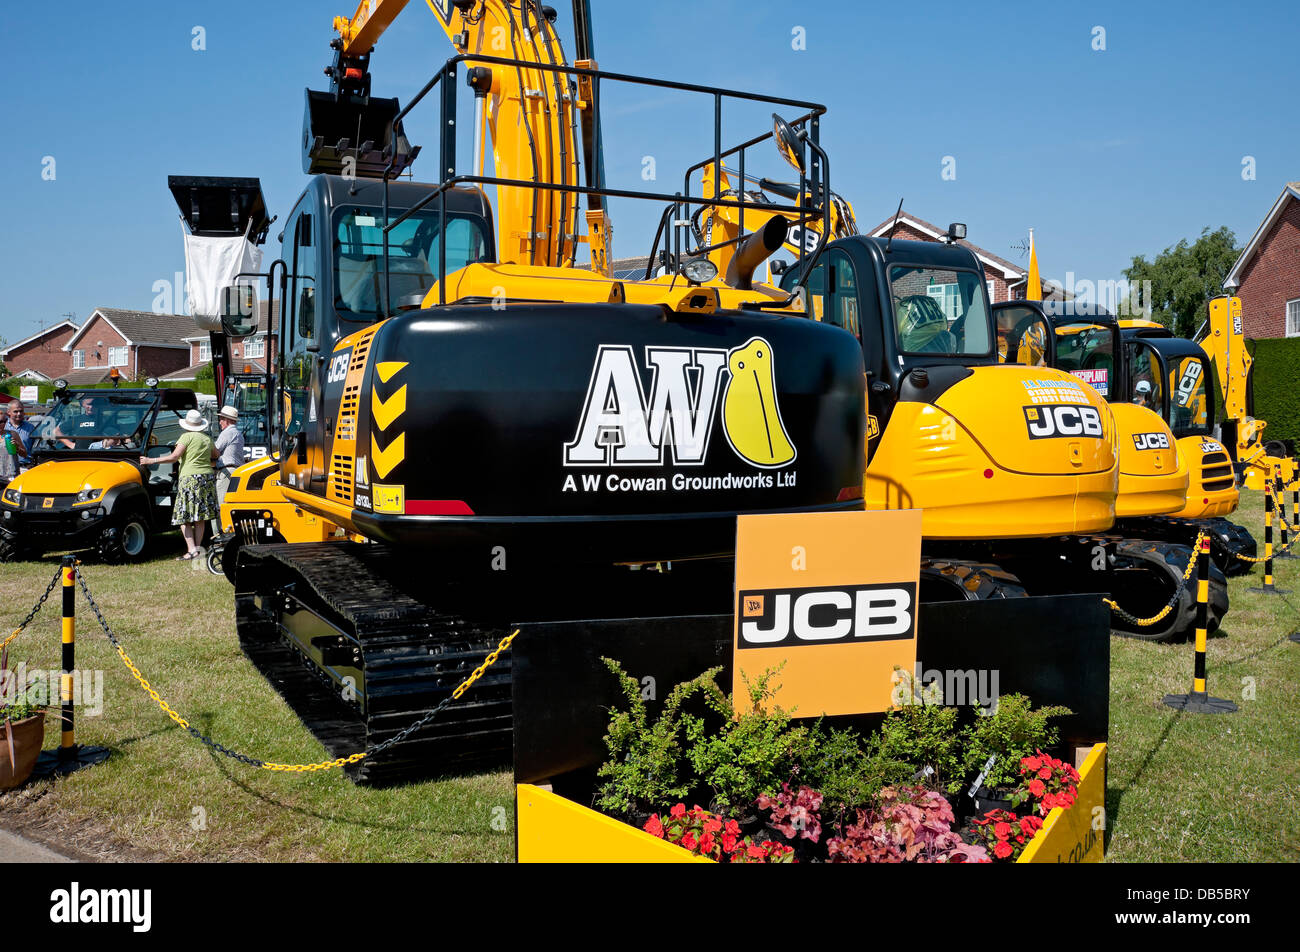 JCB digger excavator on trade stand at the Great Yorkshire Show Harrogate North Yorkshire England UK United Kingdom GB Great Britain Stock Photo